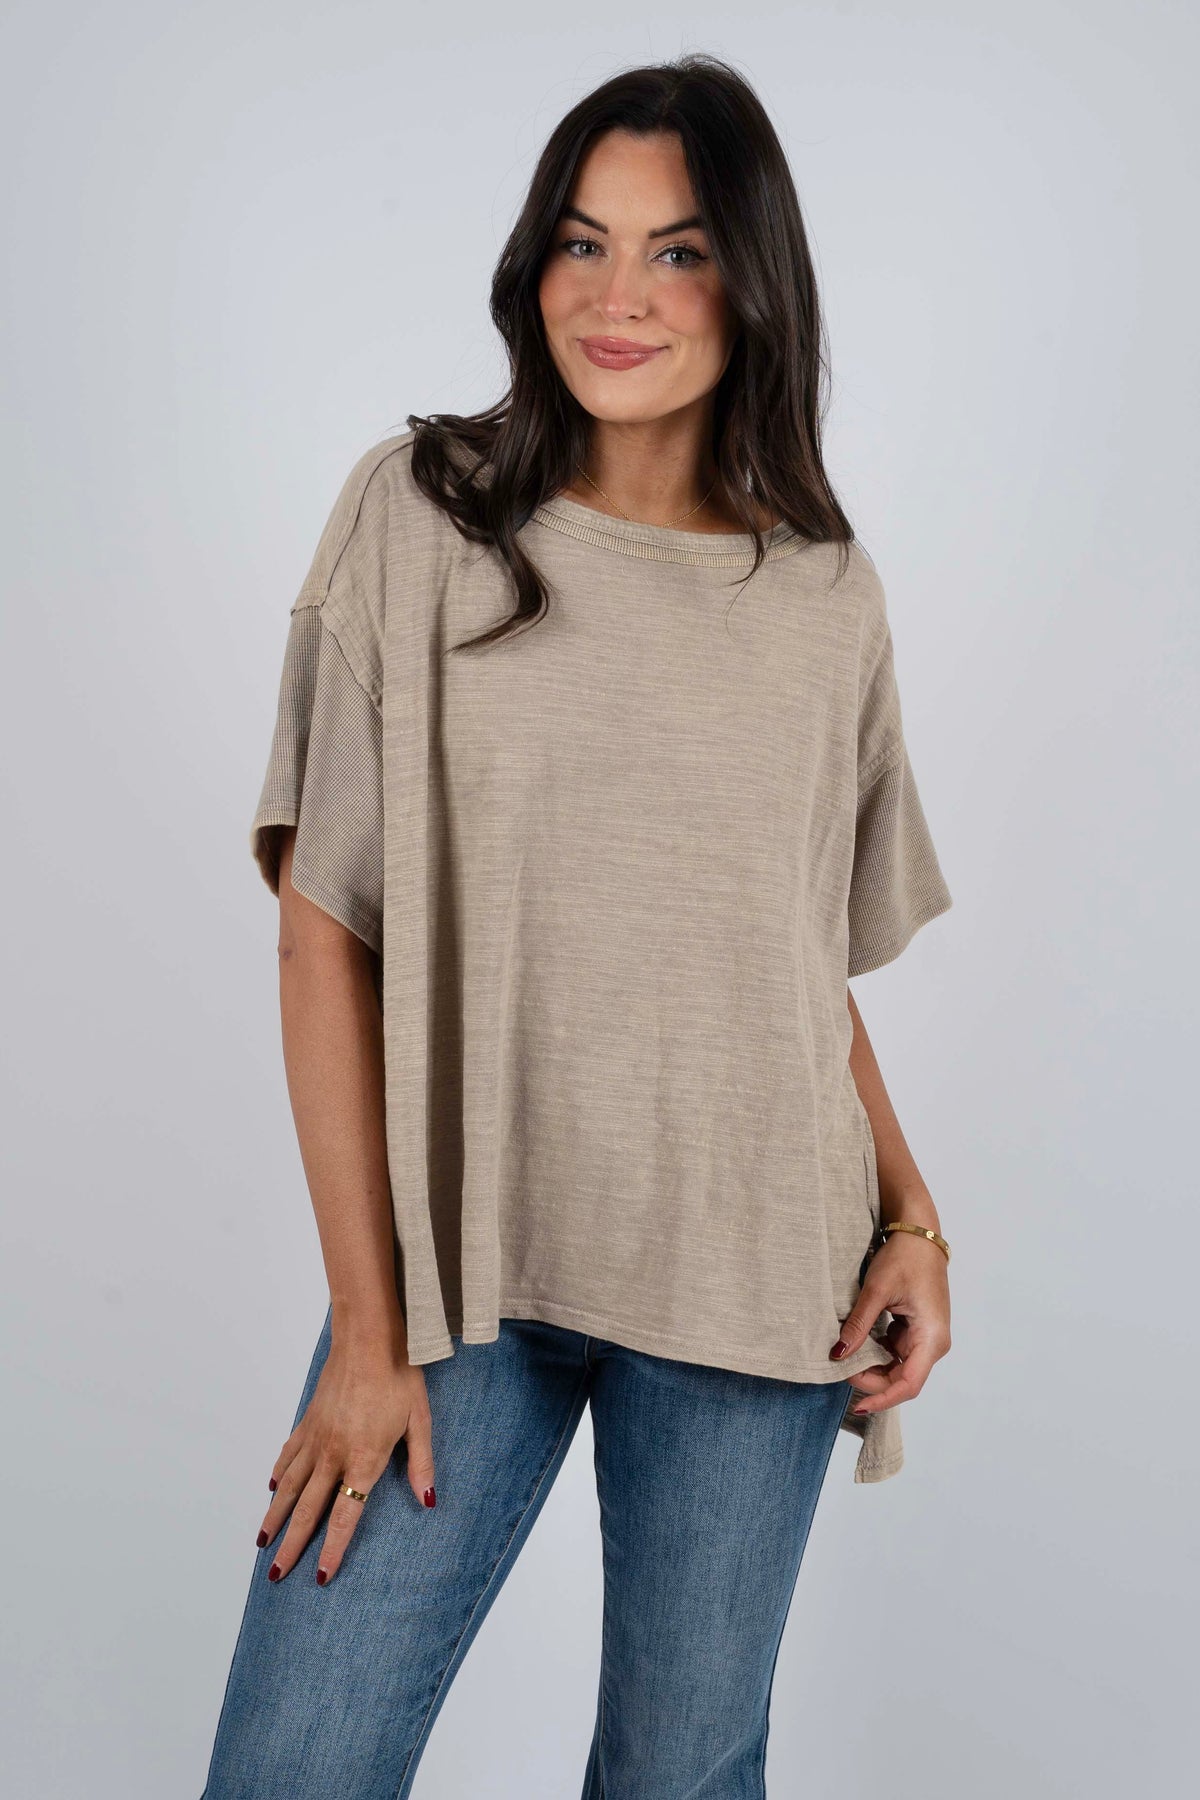 Days Like These Top (Taupe)